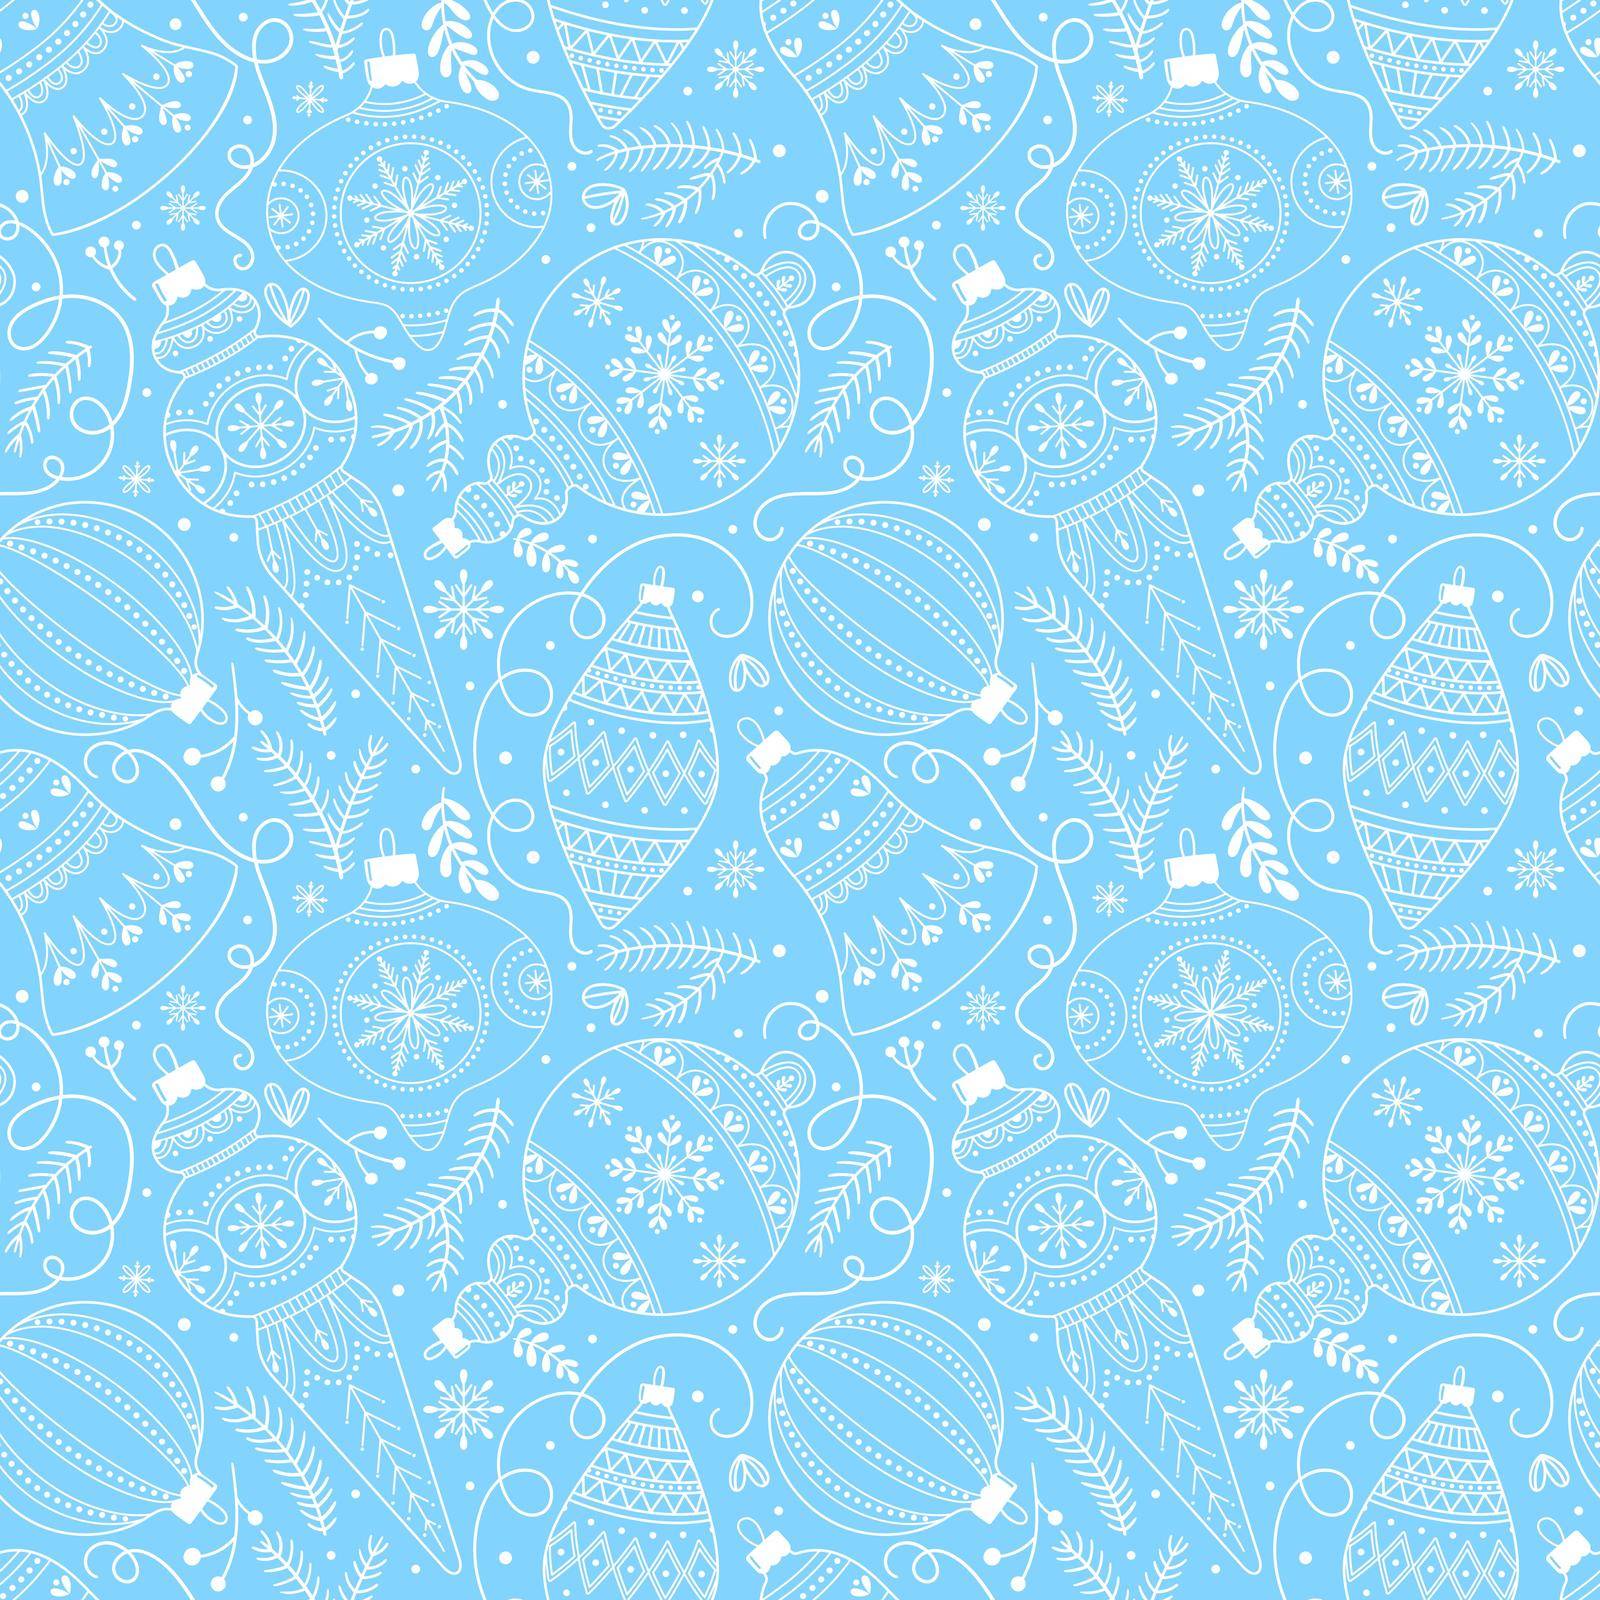 Seamless pattern with Christmas or New Year decor. Ideal for backgrounds, wrapping paper, covers, fabrics, etc. by Lena_Khmelniuk